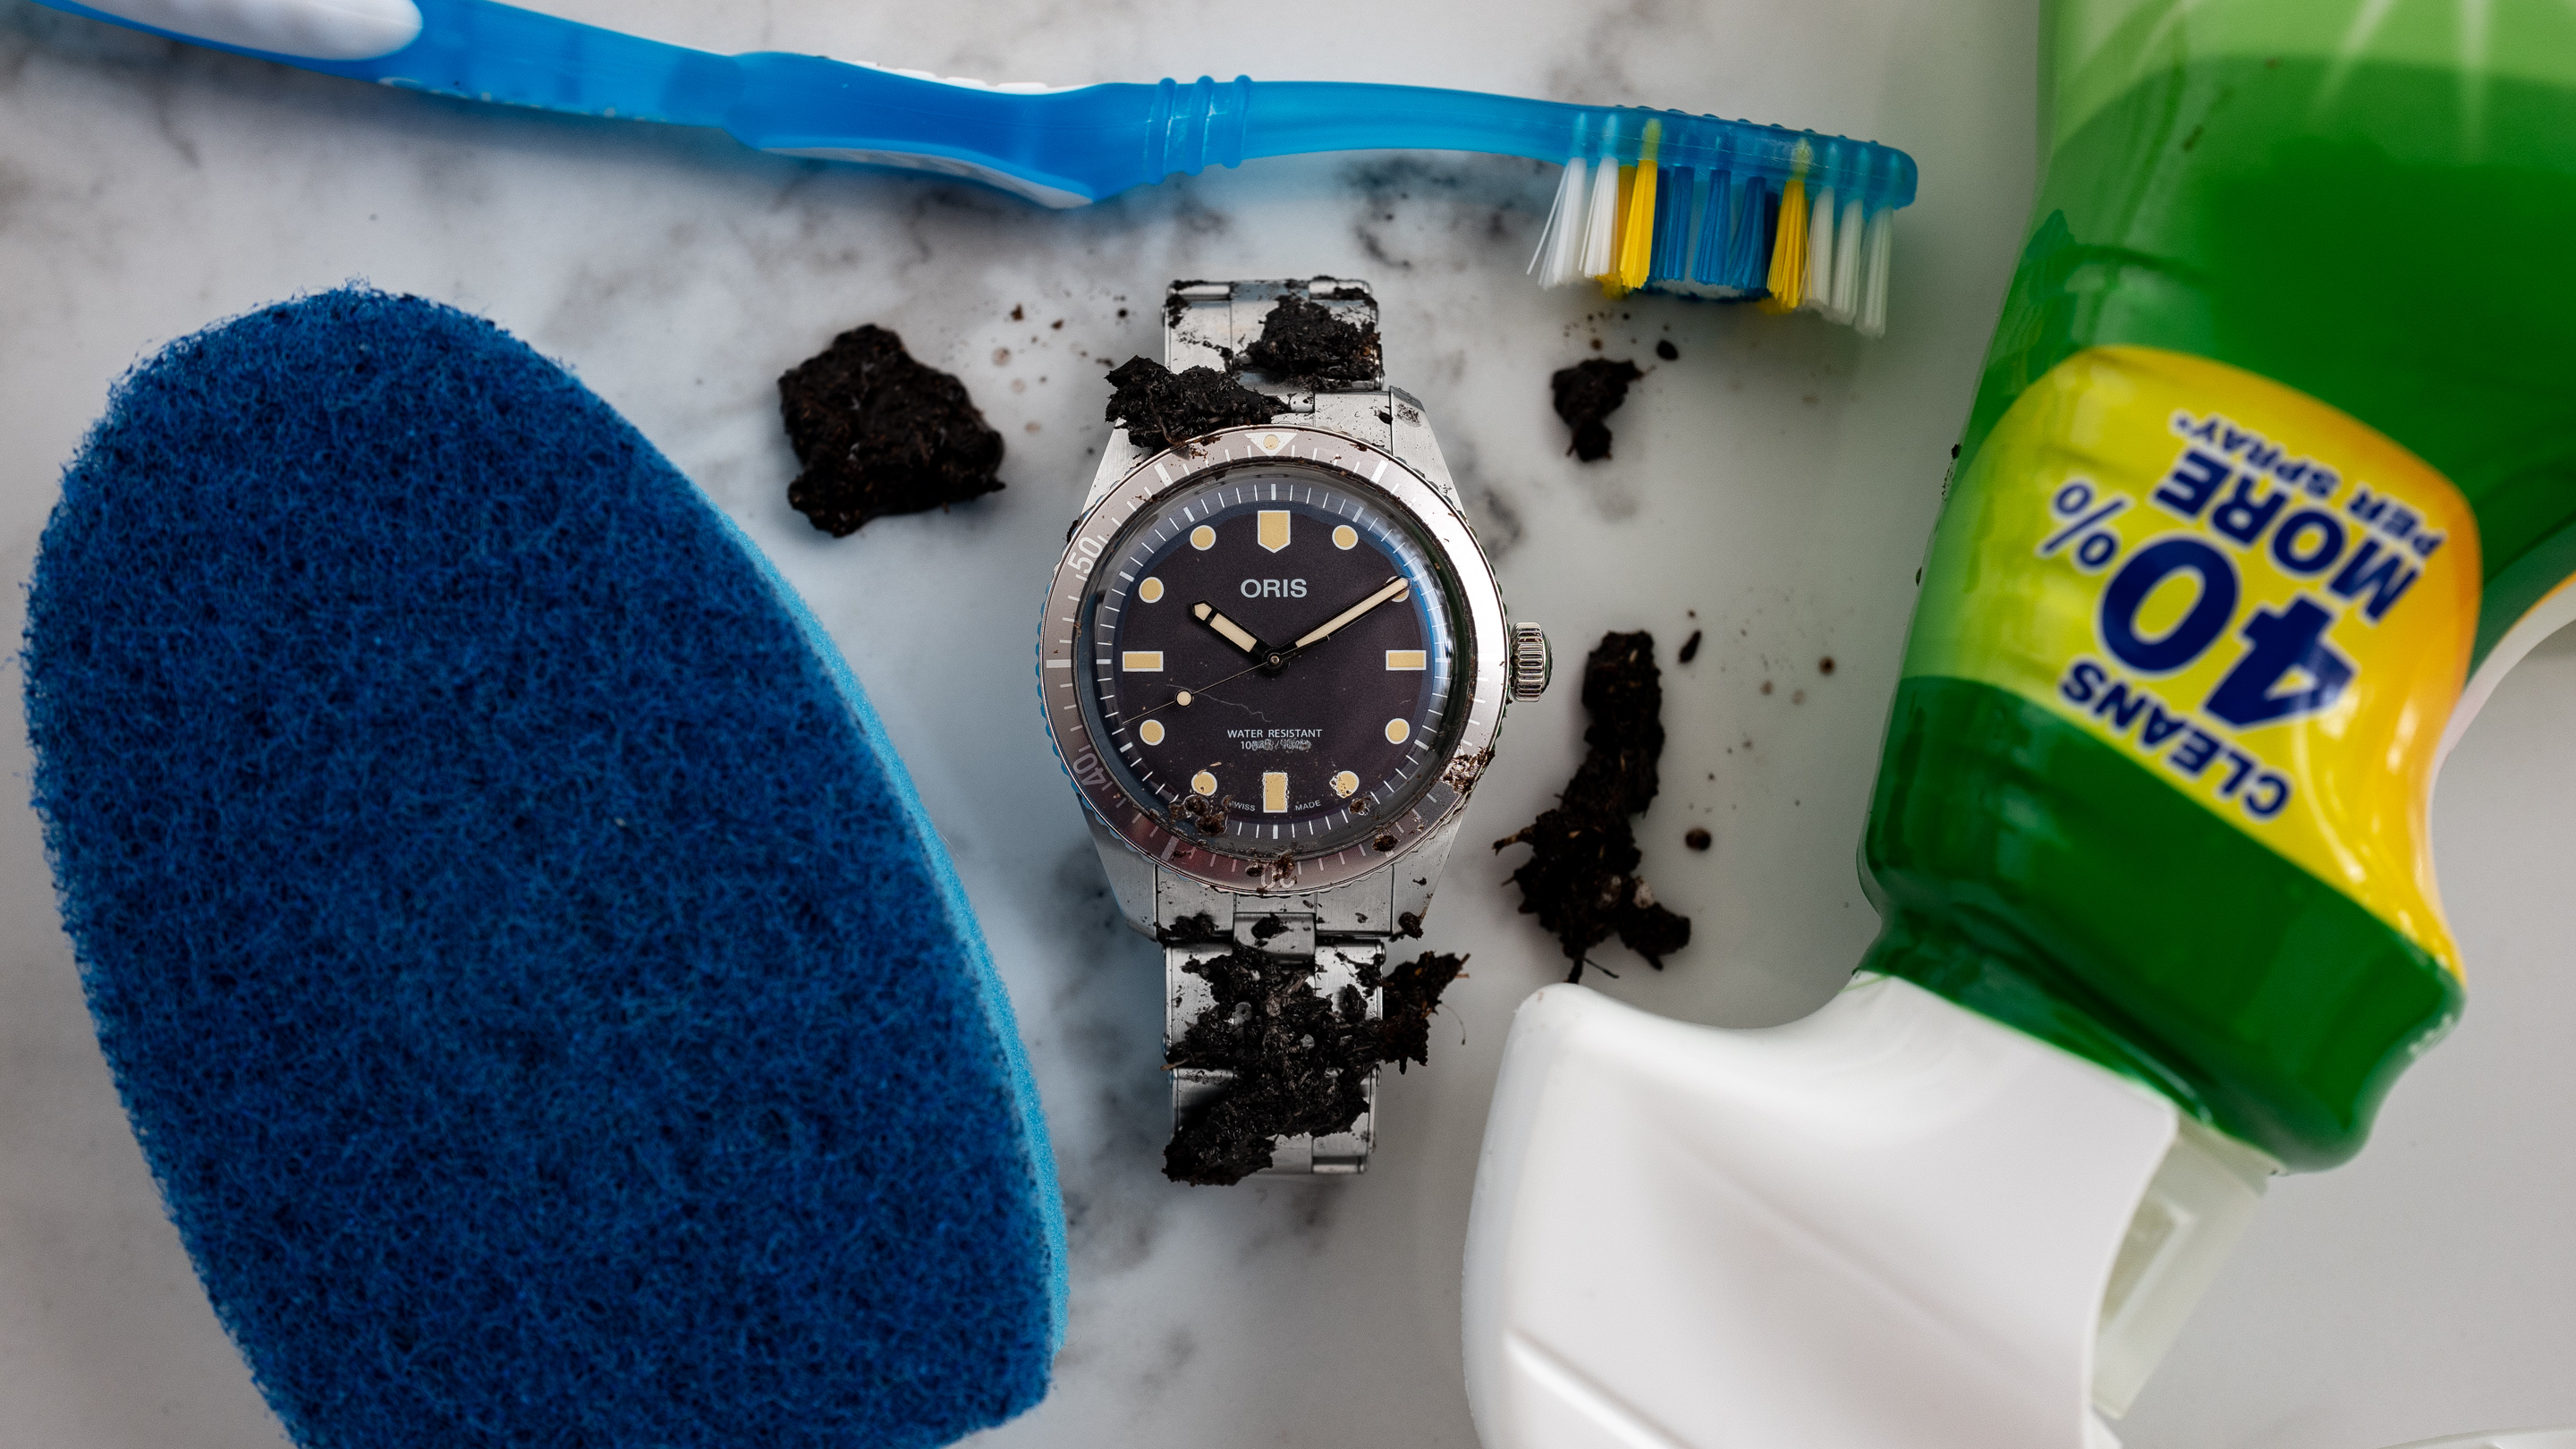 EXPLAINED: Just how waterproof is your wristwatch?